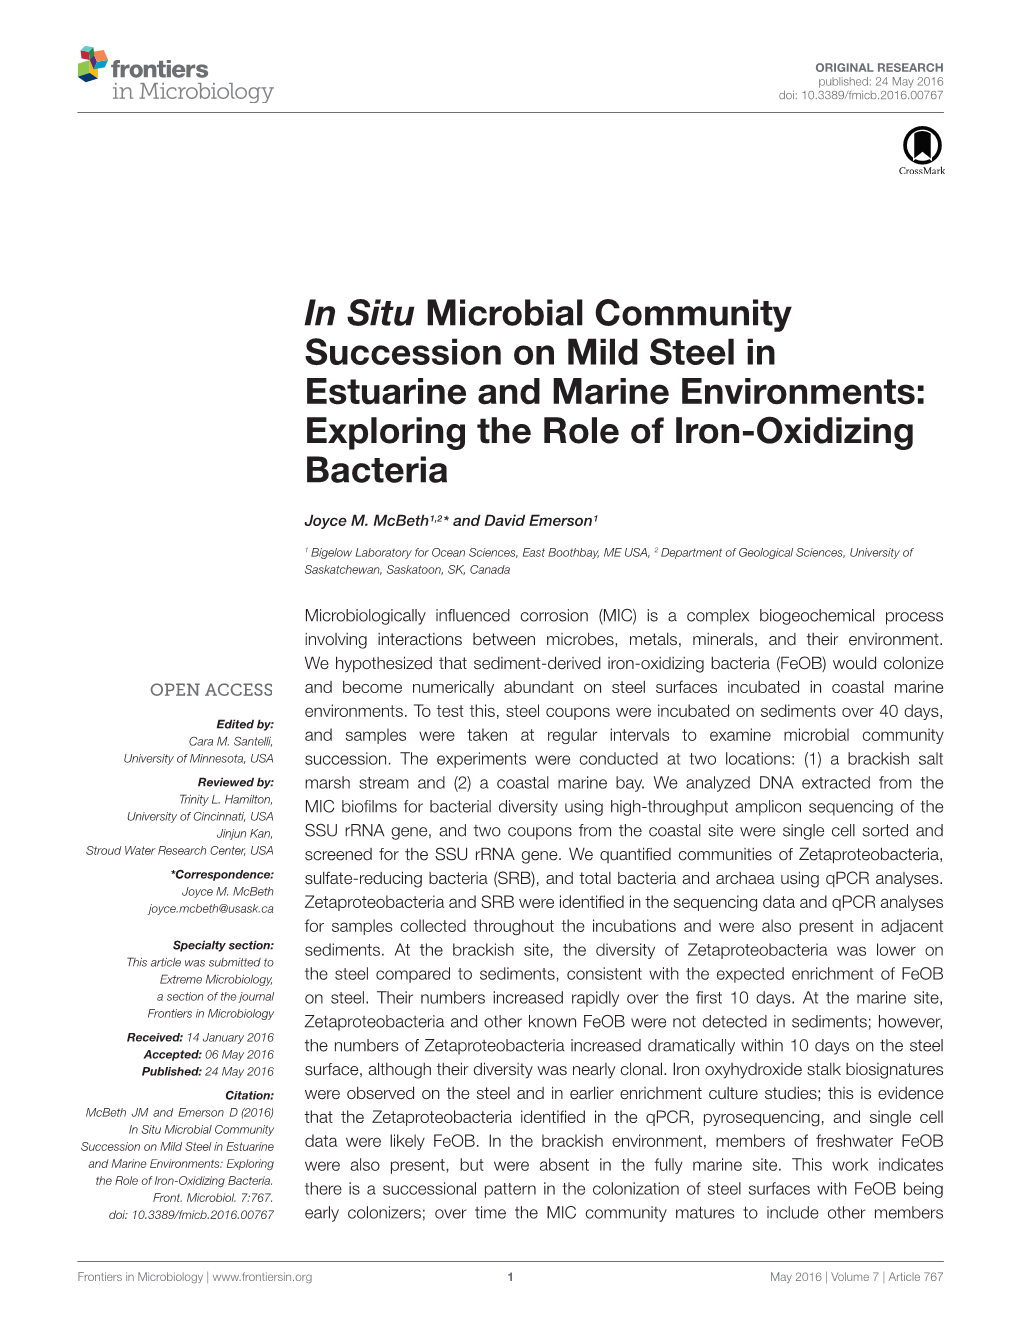 In Situ Microbial Community Succession on Mild Steel in Estuarine and Marine Environments: Exploring the Role of Iron-Oxidizing Bacteria